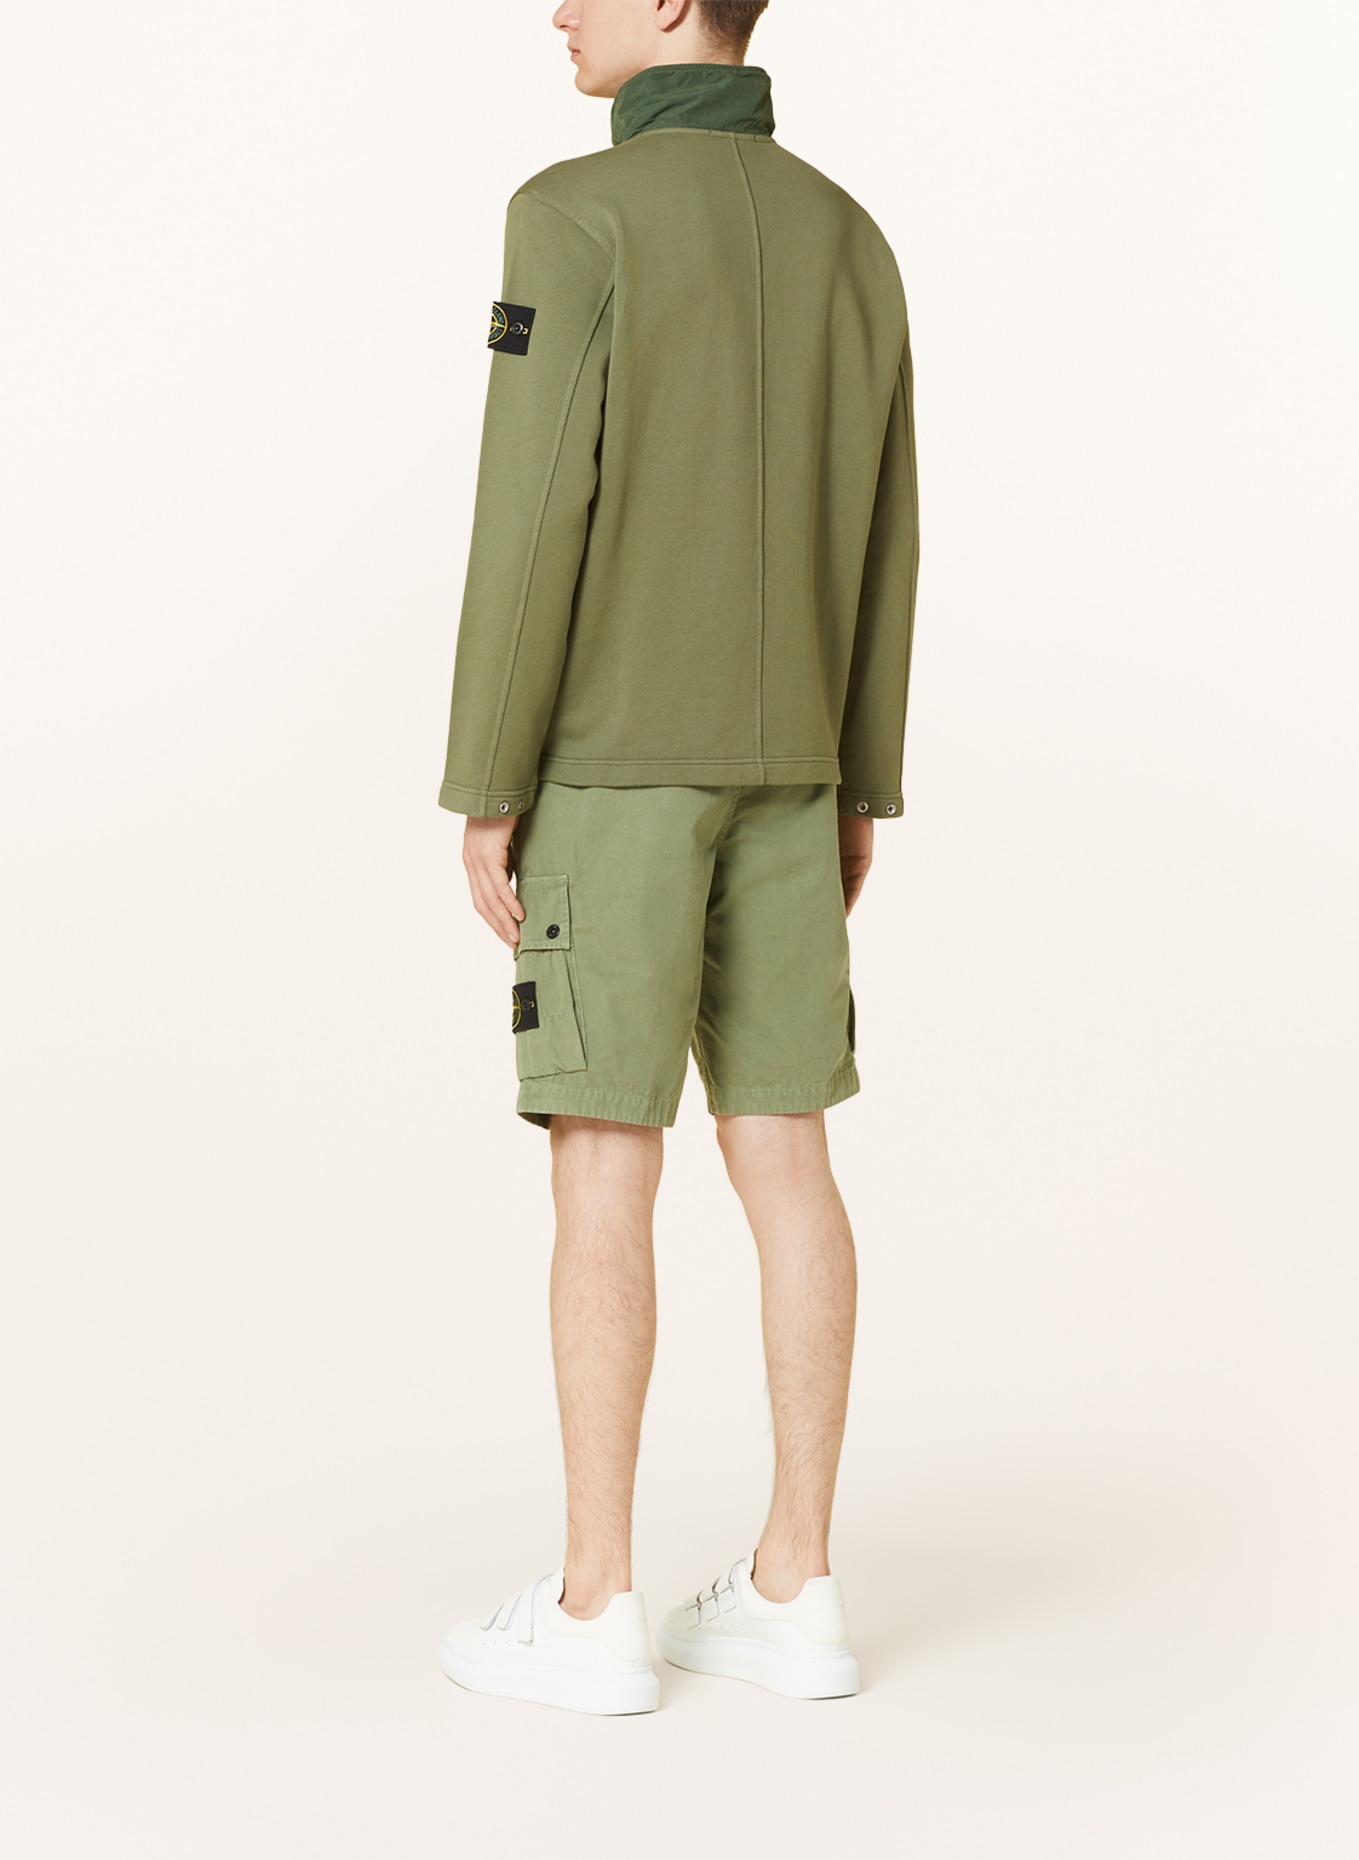 STONE ISLAND Sweat jacket in mixed materials, Color: GREEN (Image 3)